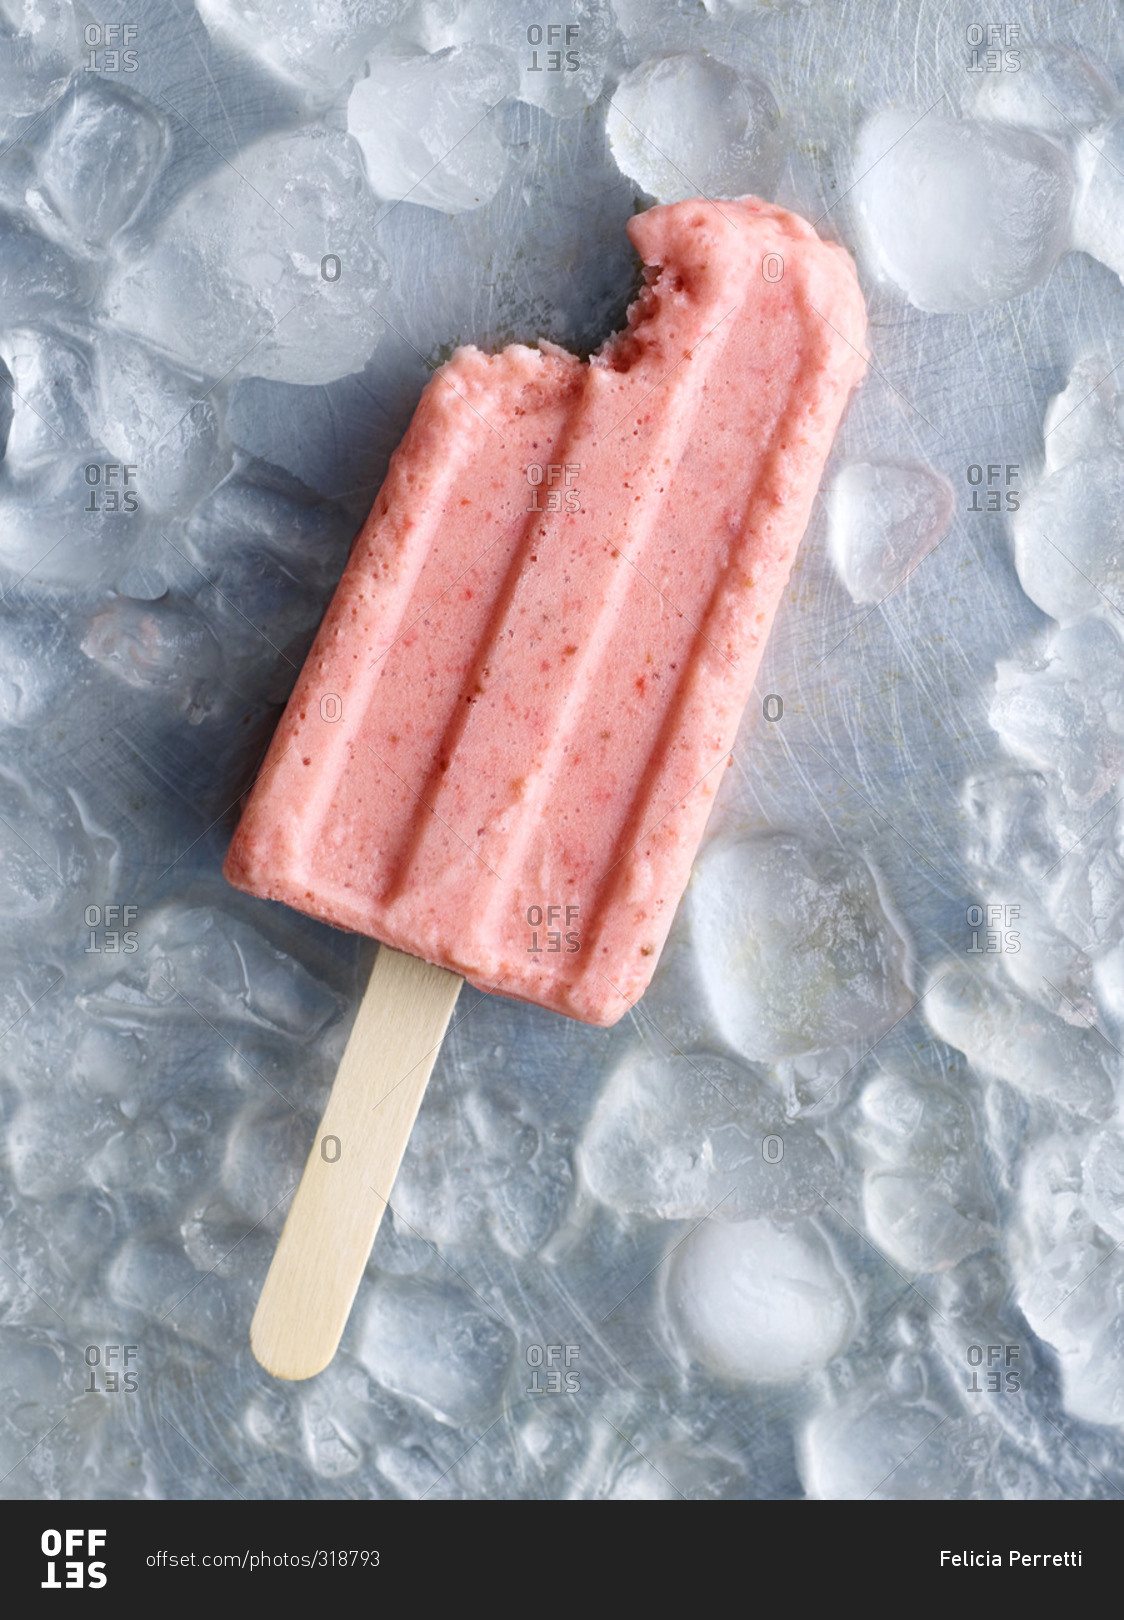 A strawberry popsicle with a bite missing